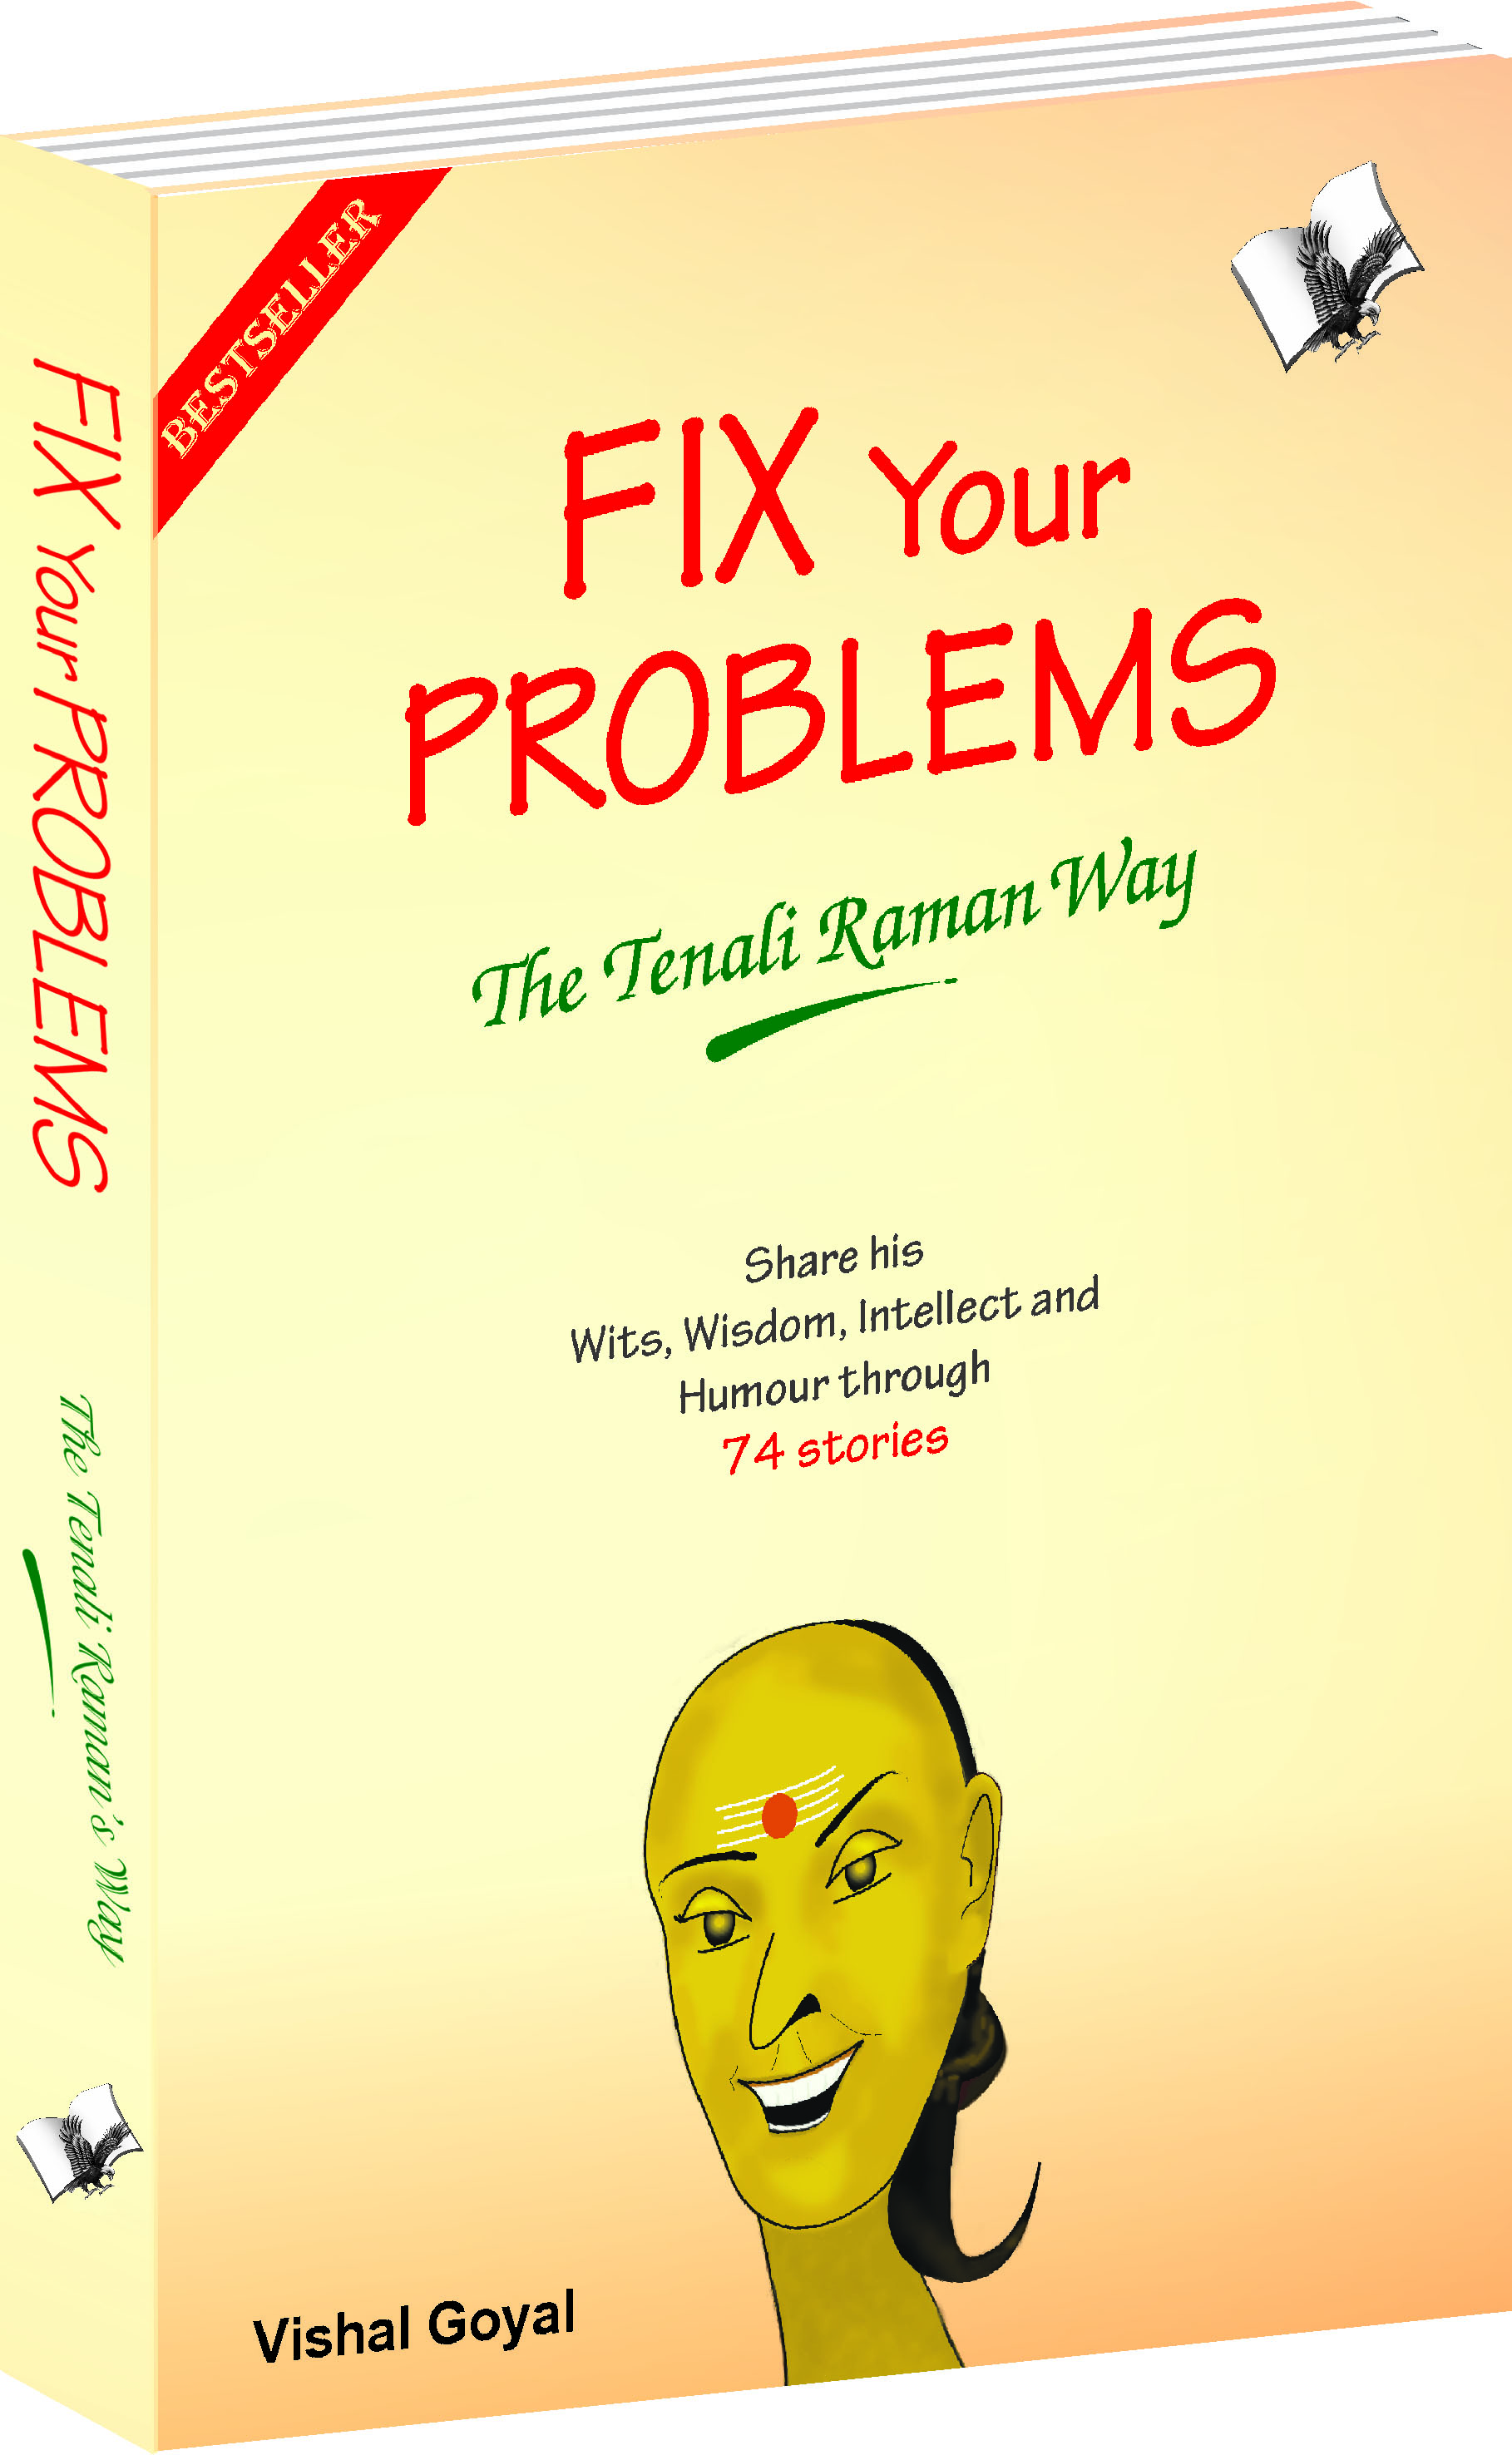 Fix Your Problems - The Tenali Raman Way-Seek solutions to social, personal and family problems the Tenali Raman way